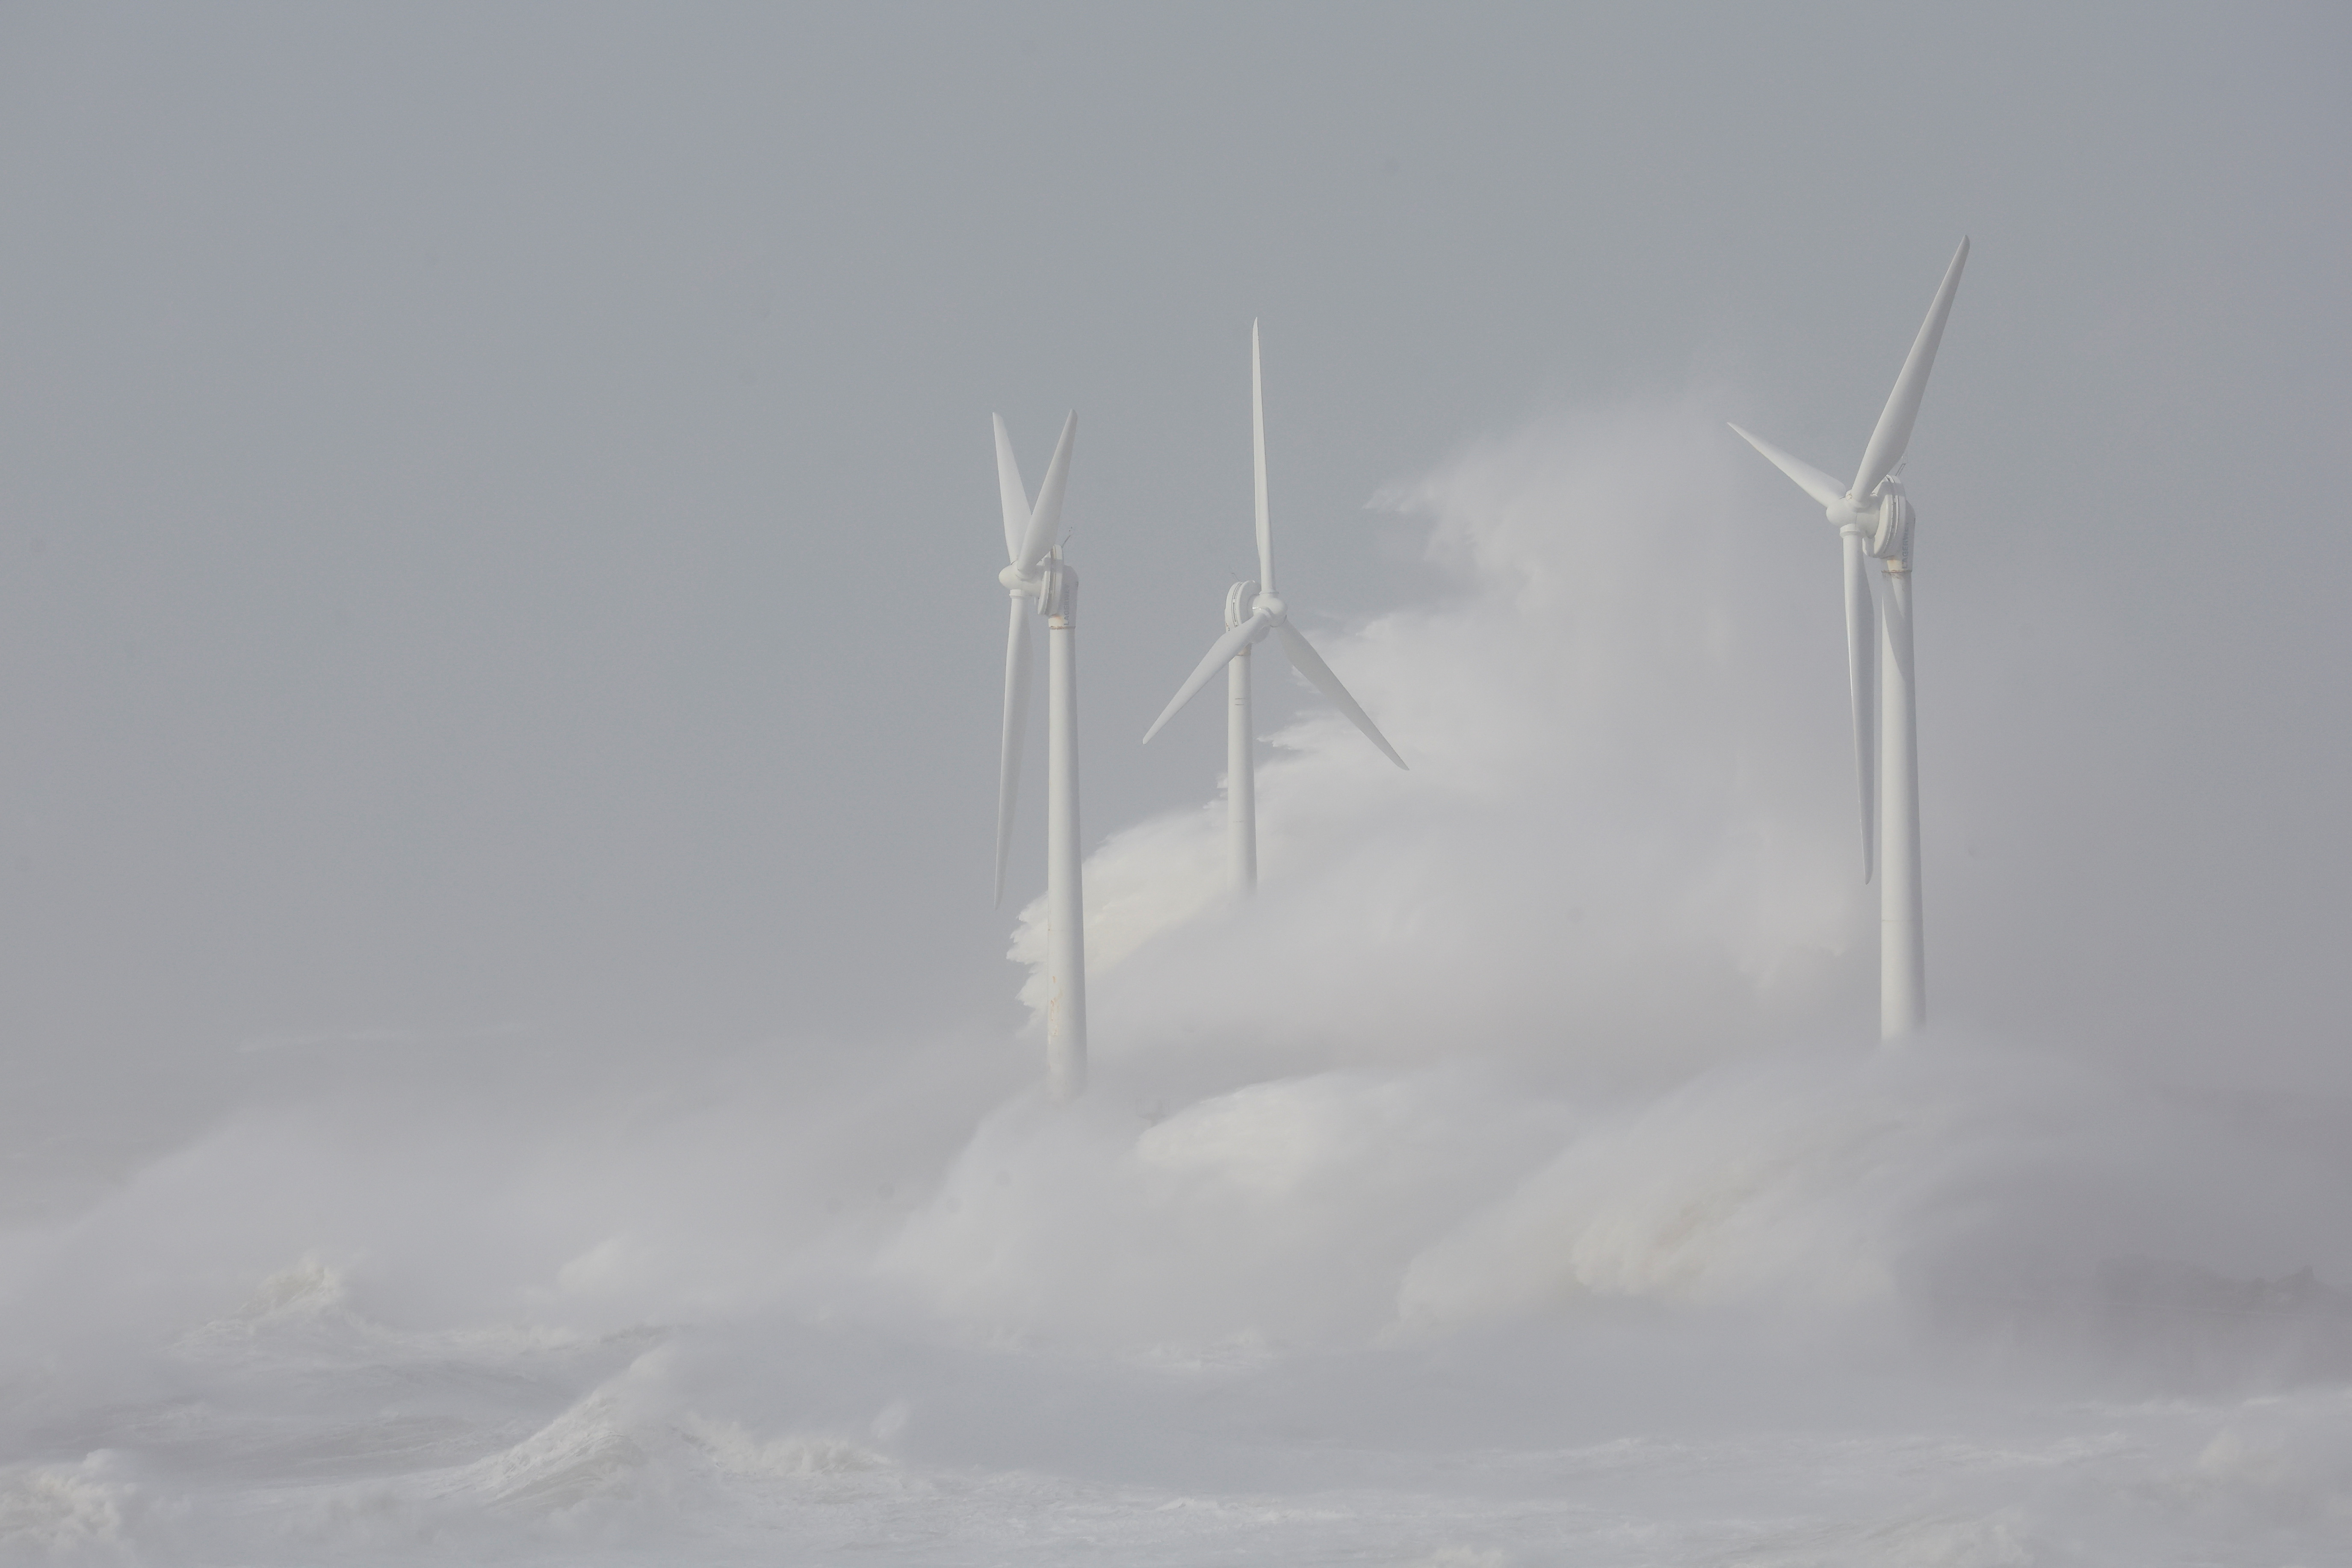 Waves crash against wind turbines during Storm Eunice at Boulogne-sur-Mer